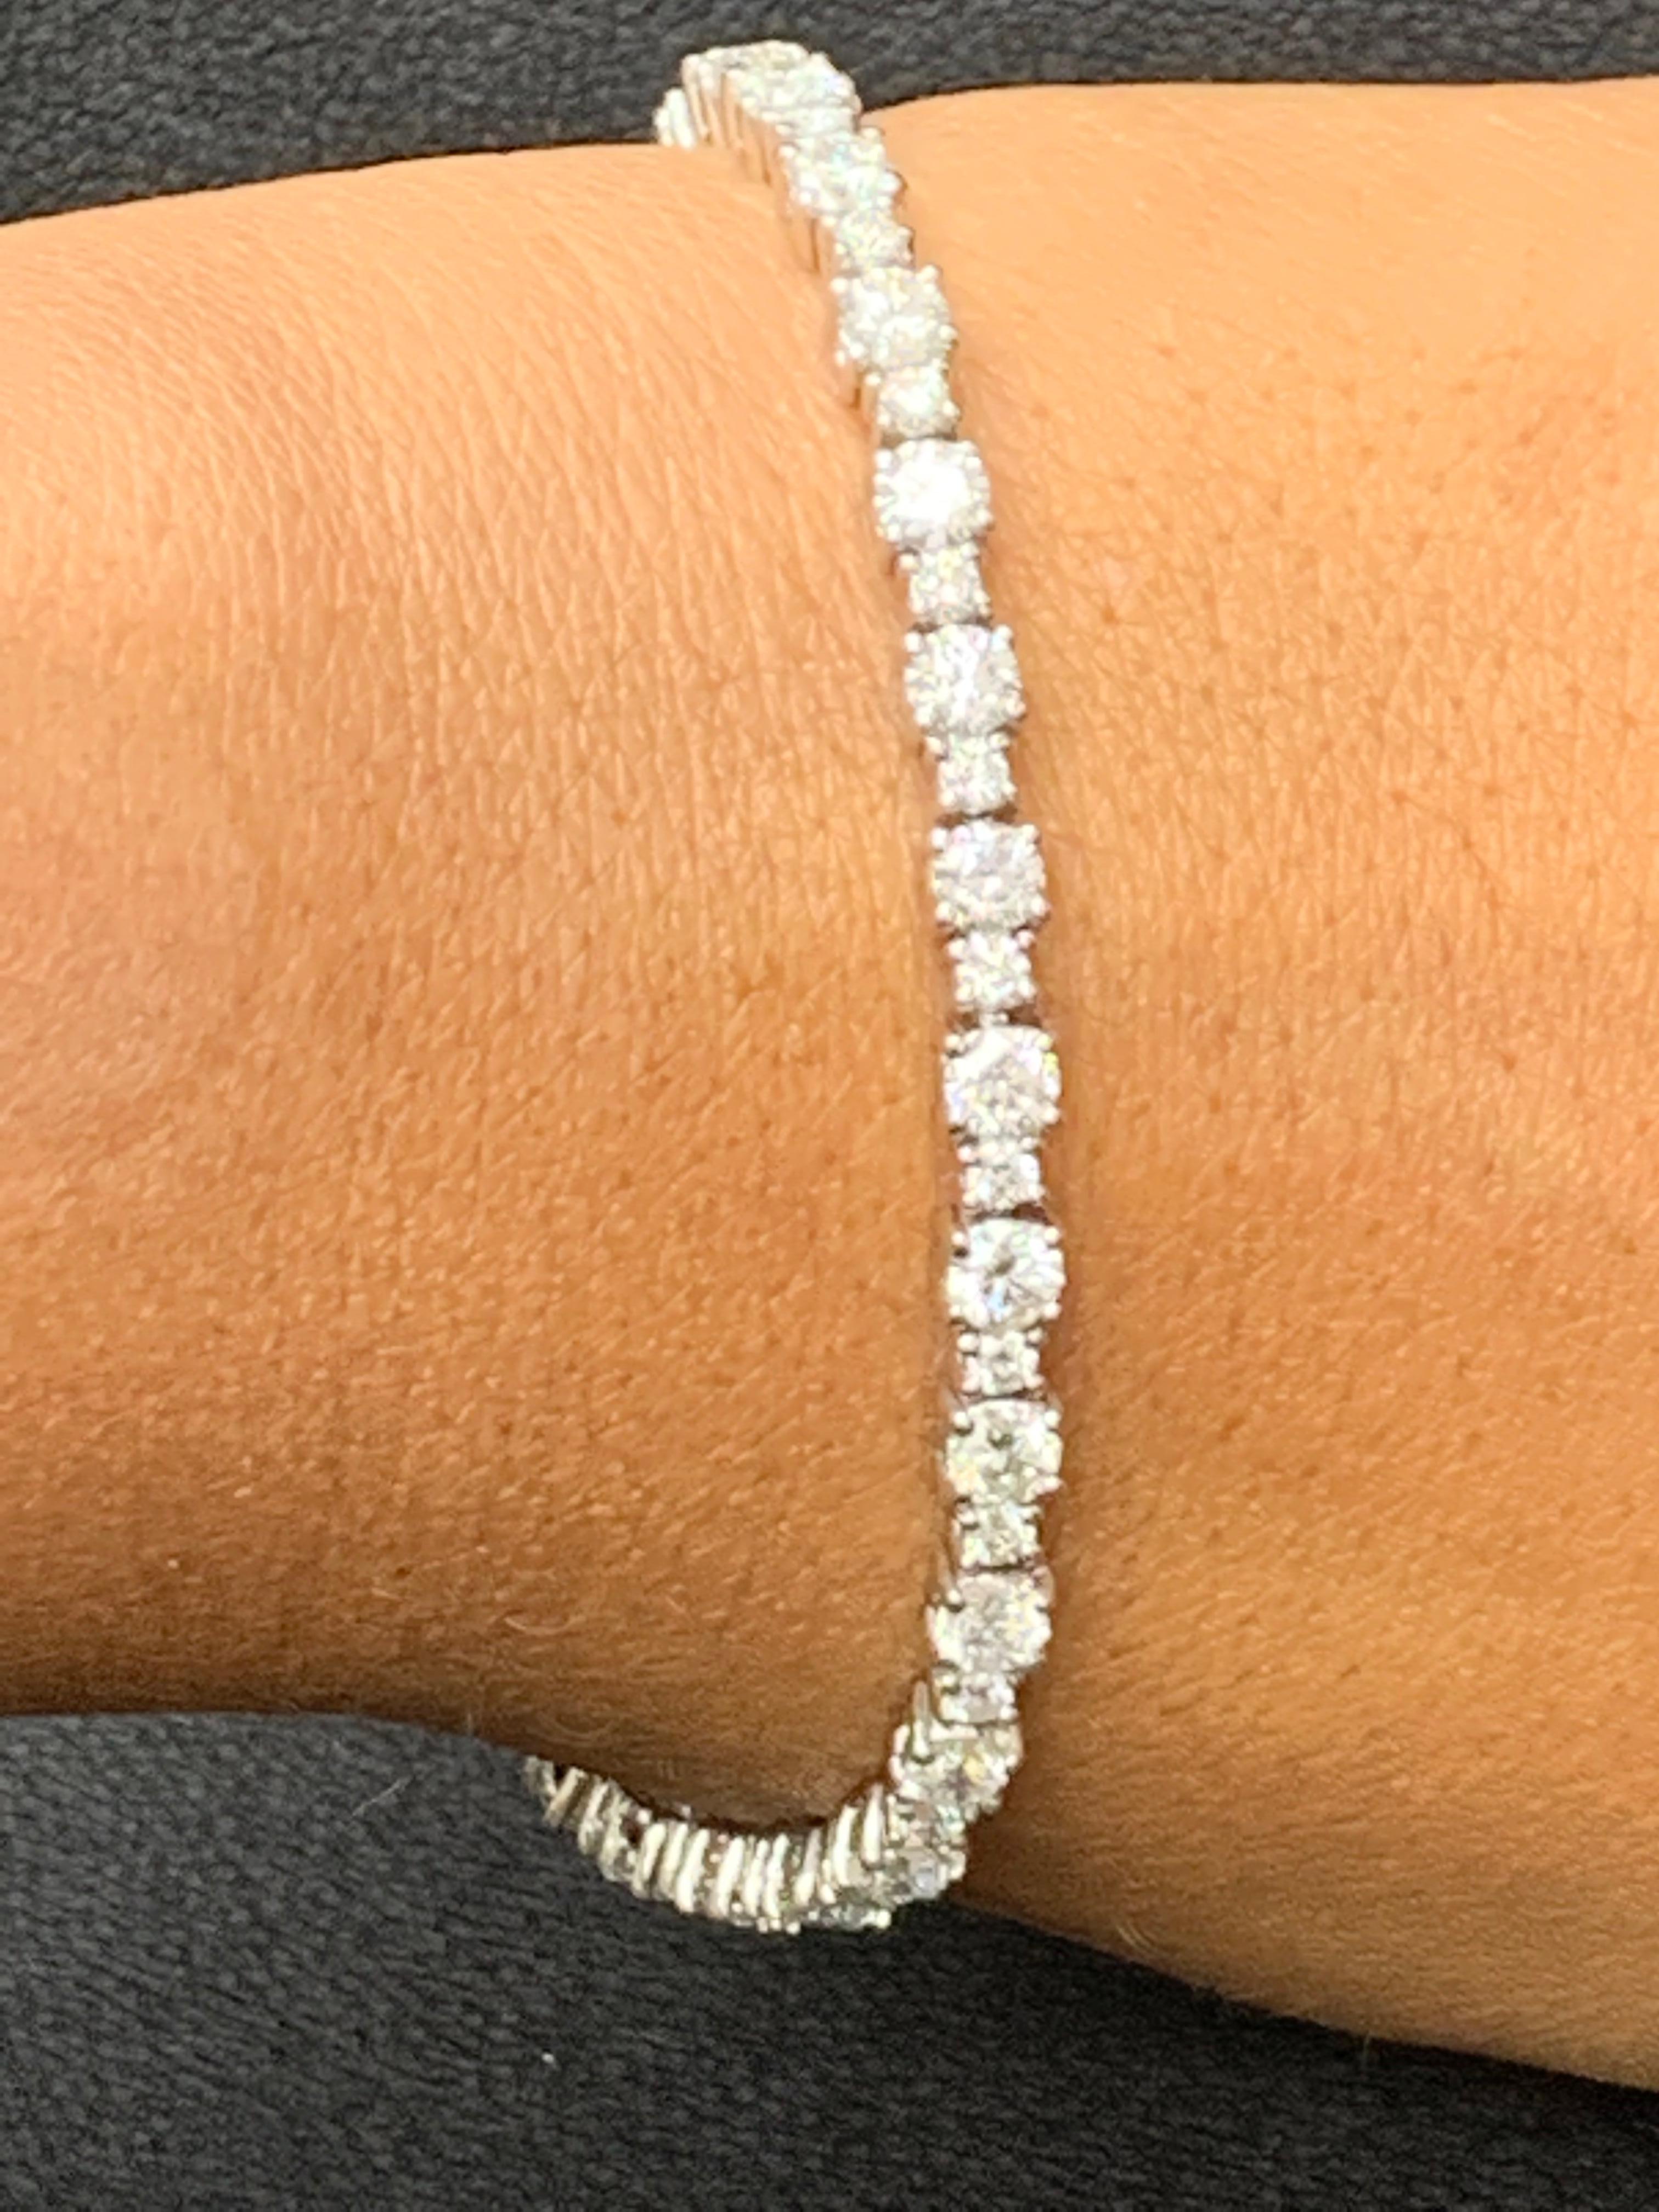 Showcasing 5.78 carats total of 28 brilliant-cut Big diamonds, elegantly alternating with 1.23 carats of 28 round brilliant small diamonds. Made in 14 karats white gold.

Style available in different price ranges. Prices are based on your selection